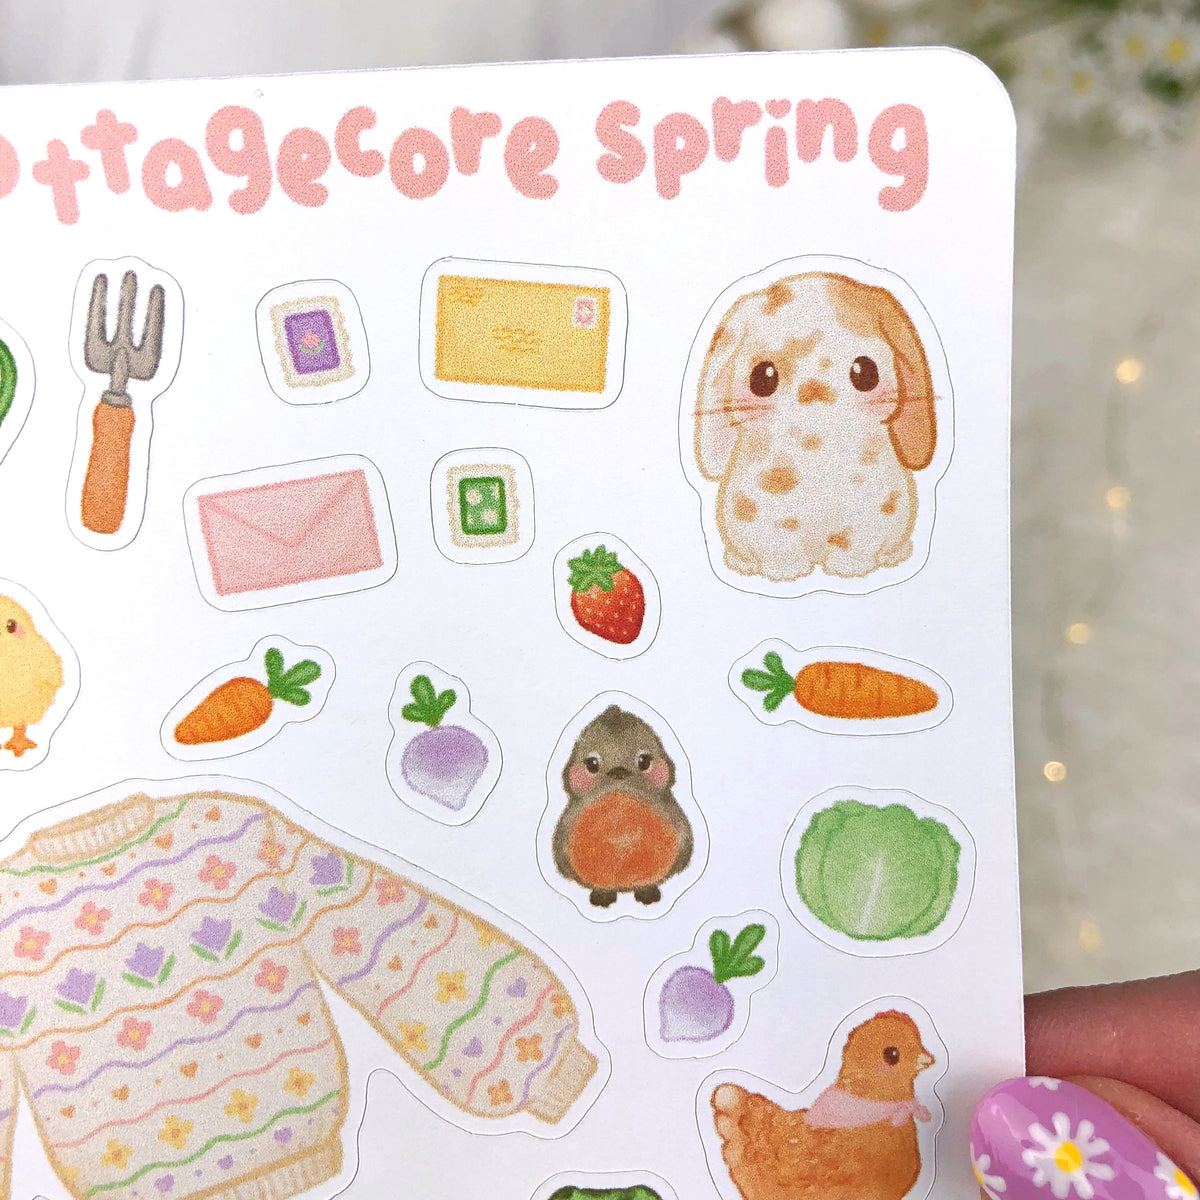 Spring Cottagecore Sticker Sheet (Hand Drawn Doodle Collection) - Country  Garden Spring Stickers - Cottage Core Aesthetic Planner Decor